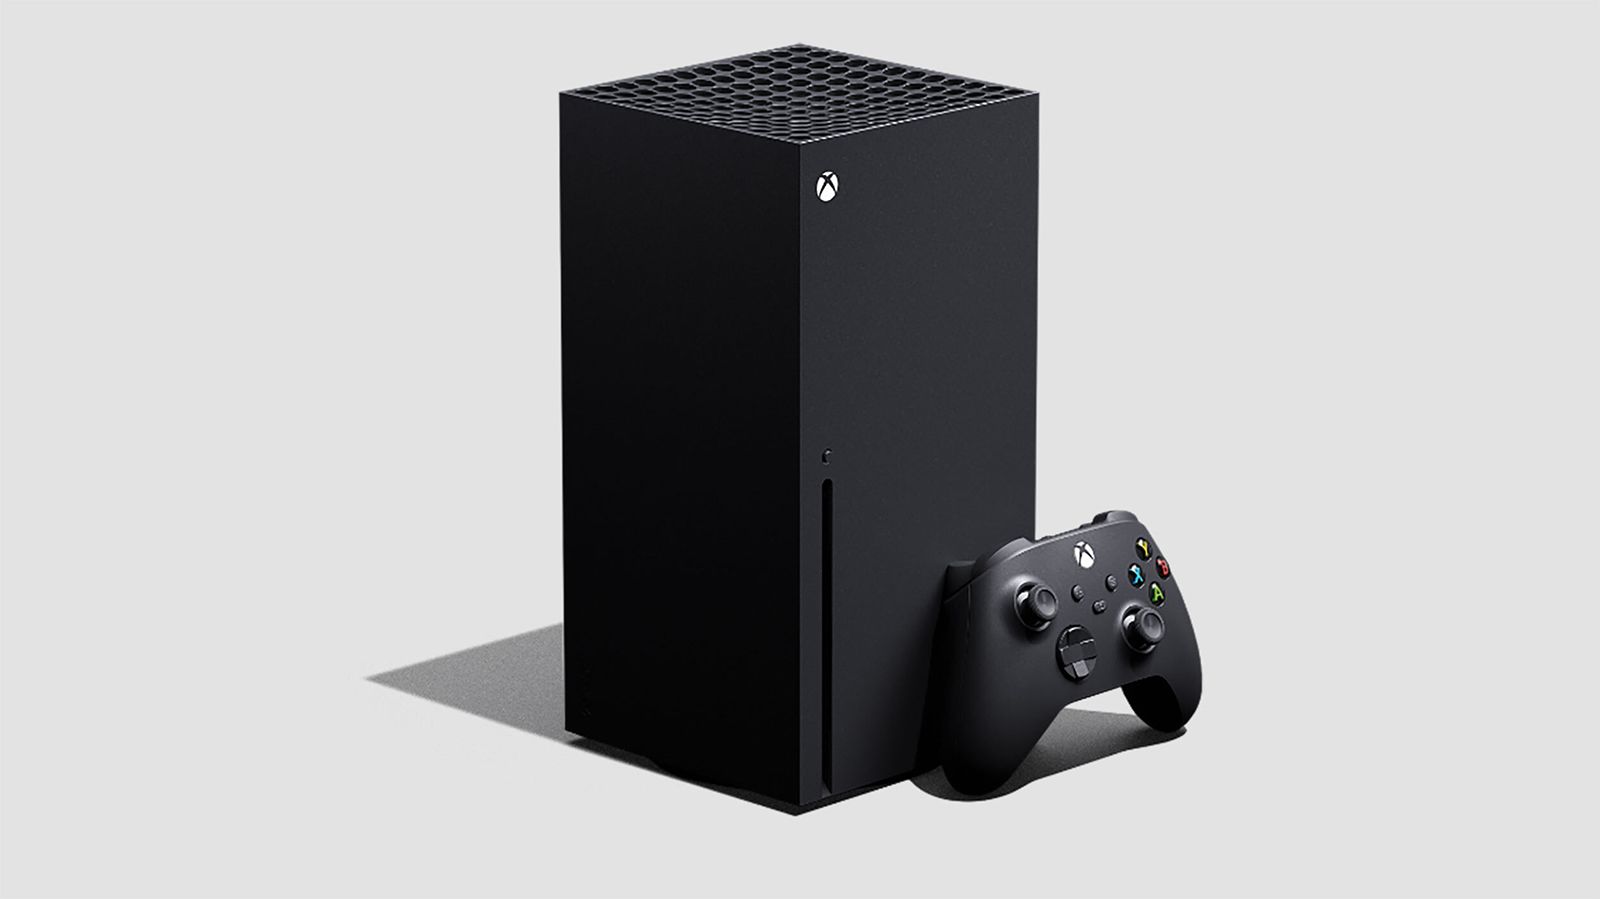 Missed Out on the Xbox Series X/S? Don't Expect One Before April 2021